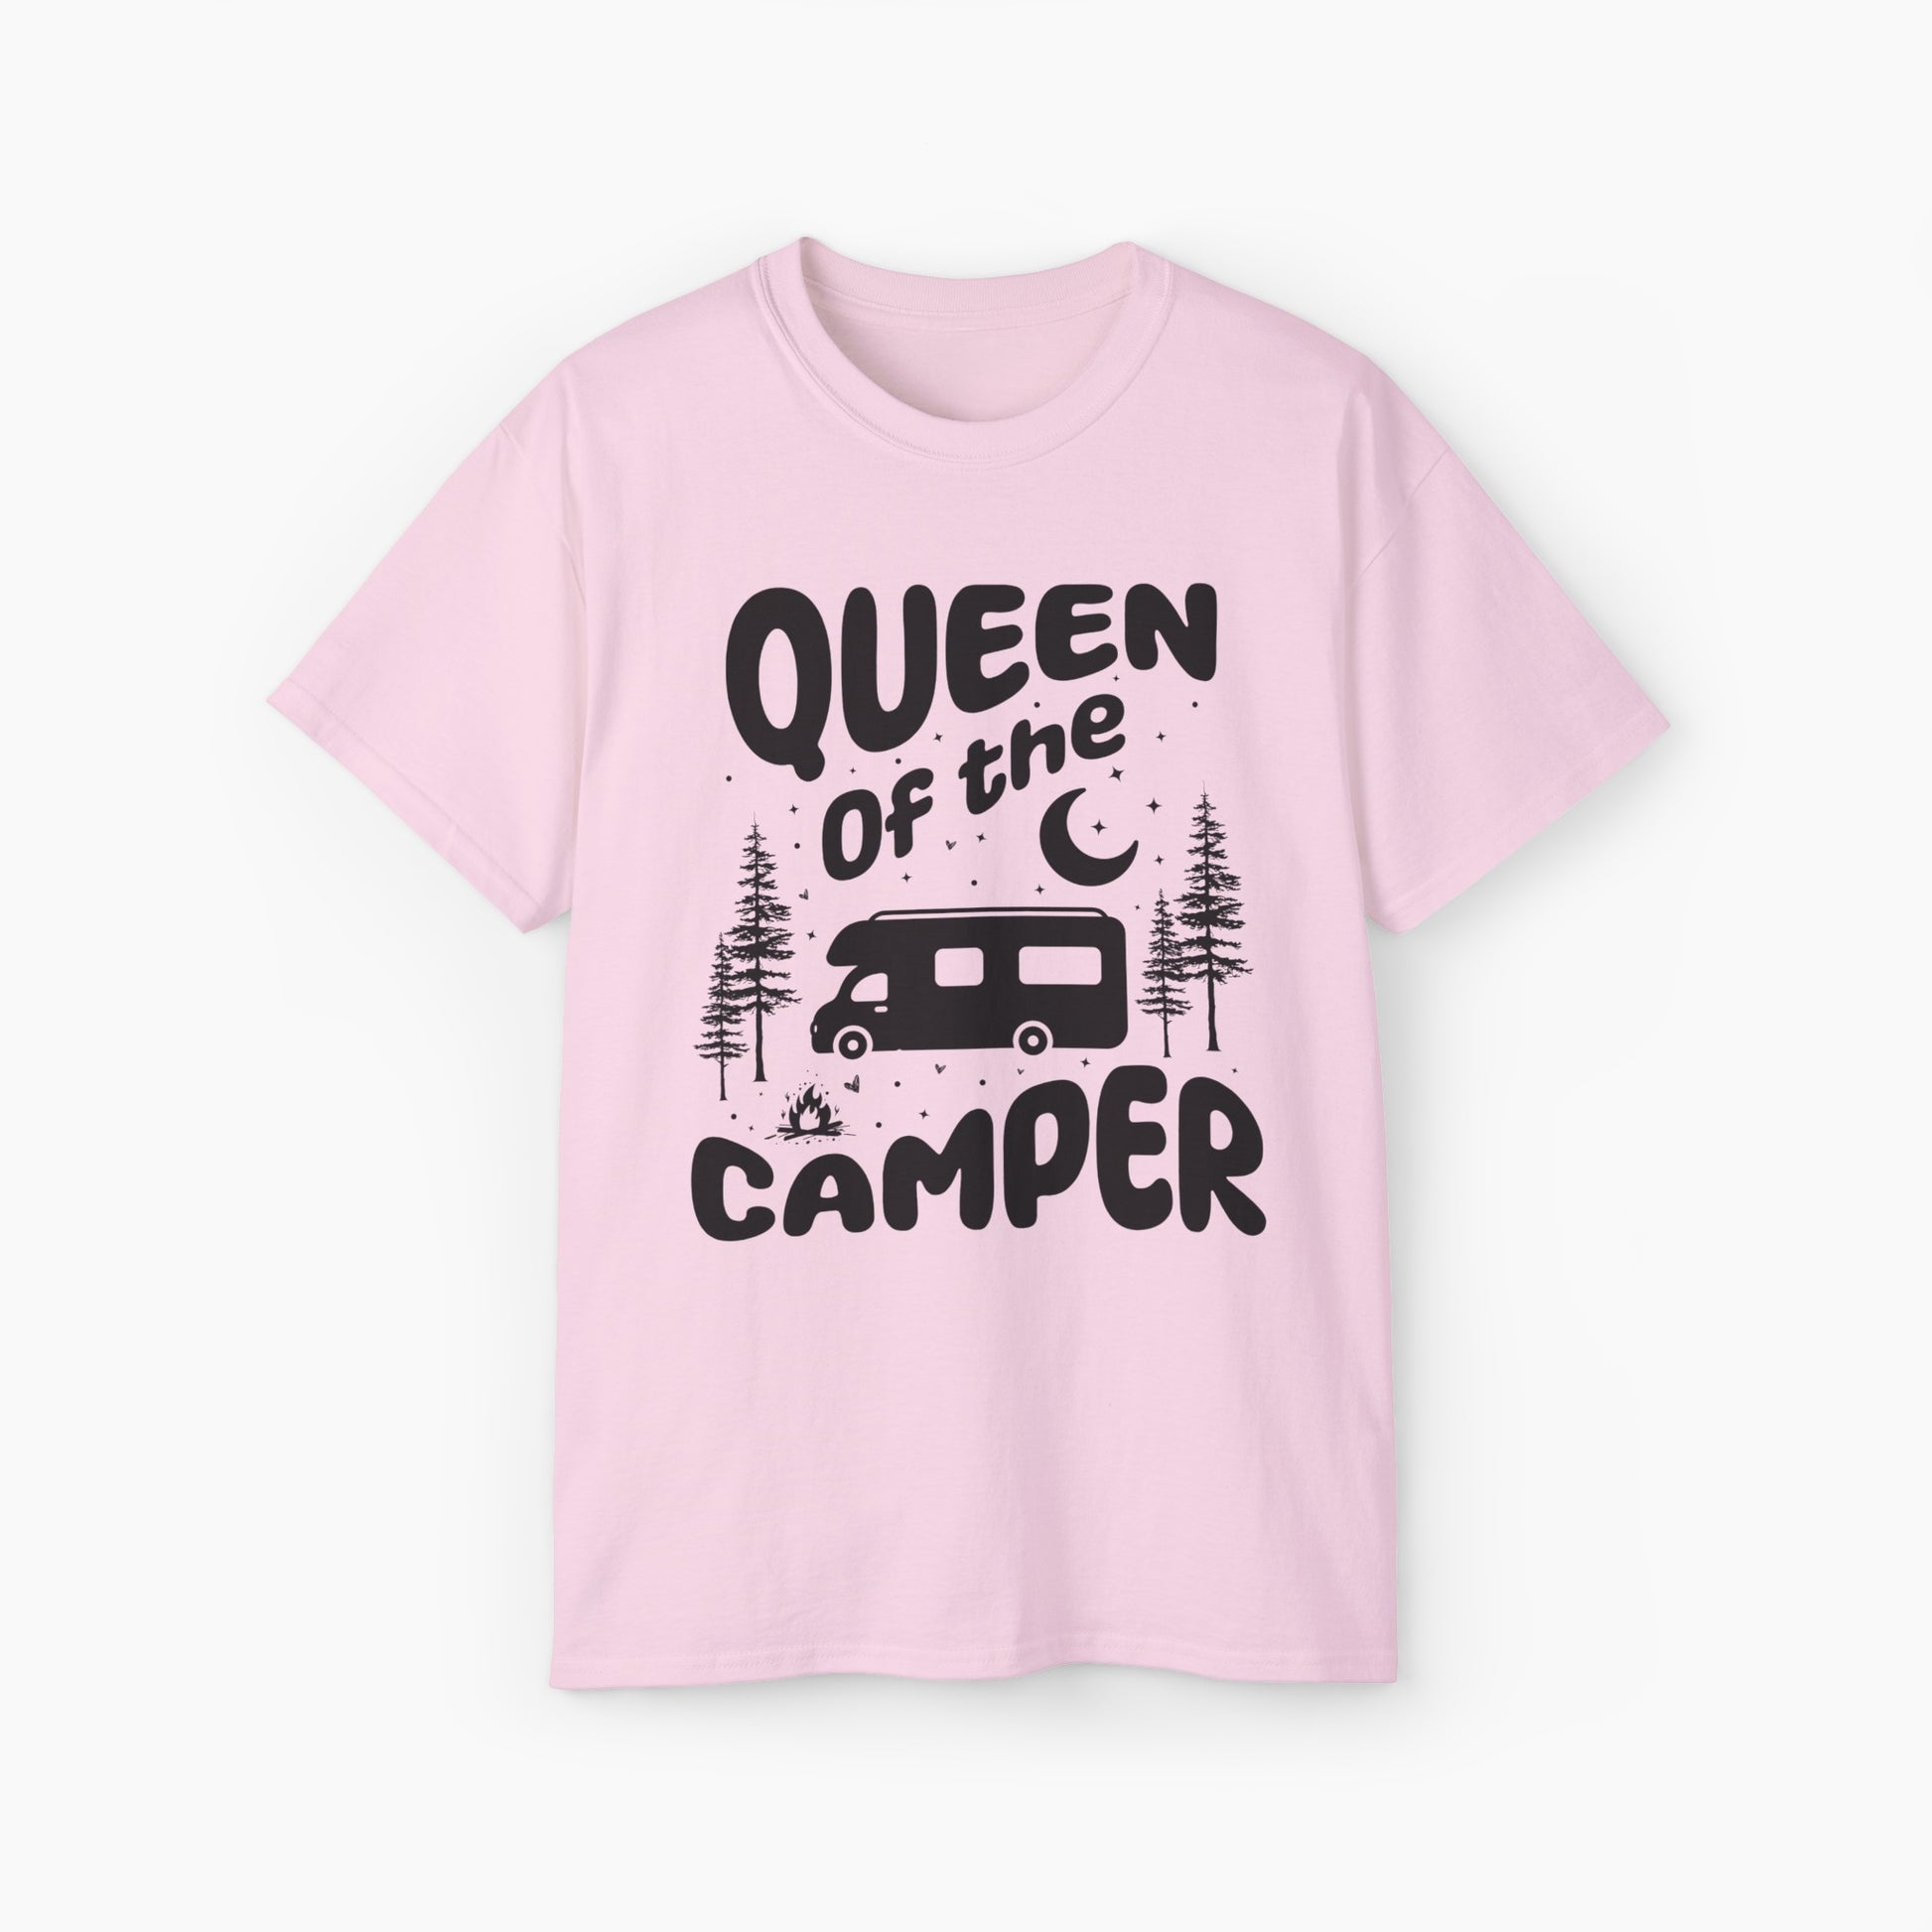 Pink t-shirt with 'Camping Queen' text, illustrated with a camping van, stars, trees, campfire, and moon, on a plain background.